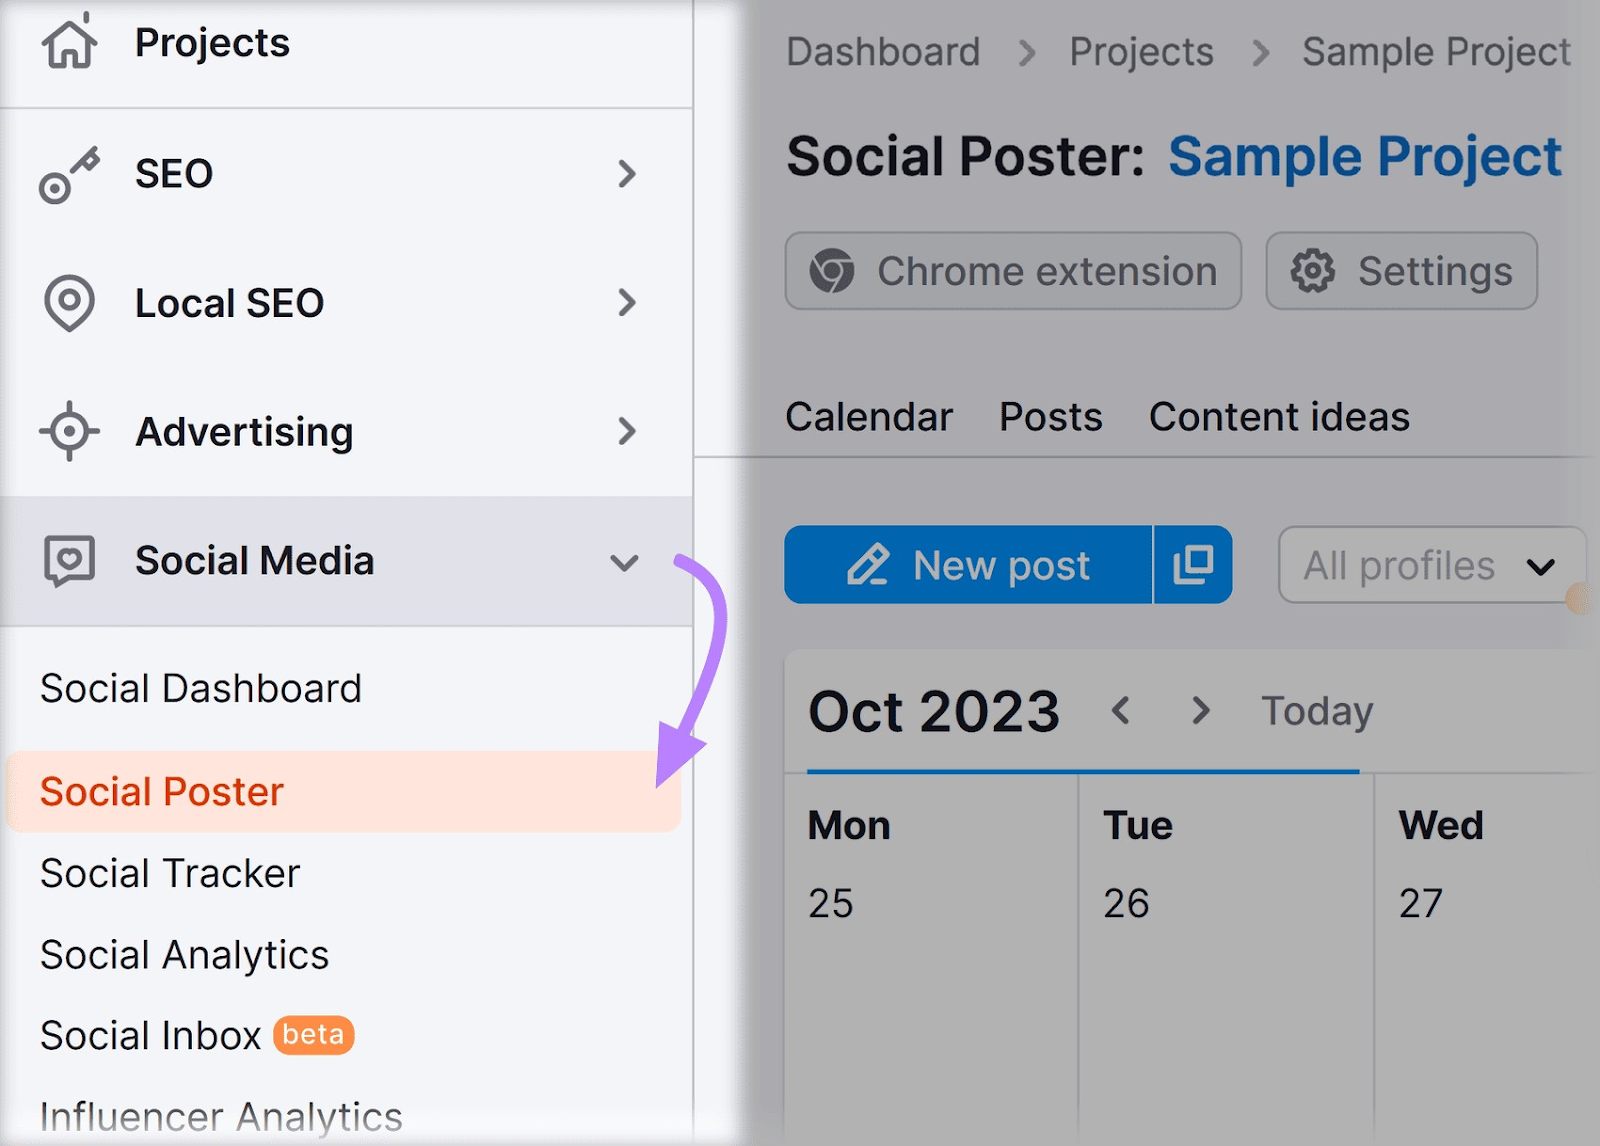 “Social Poster” selected form the sidebar